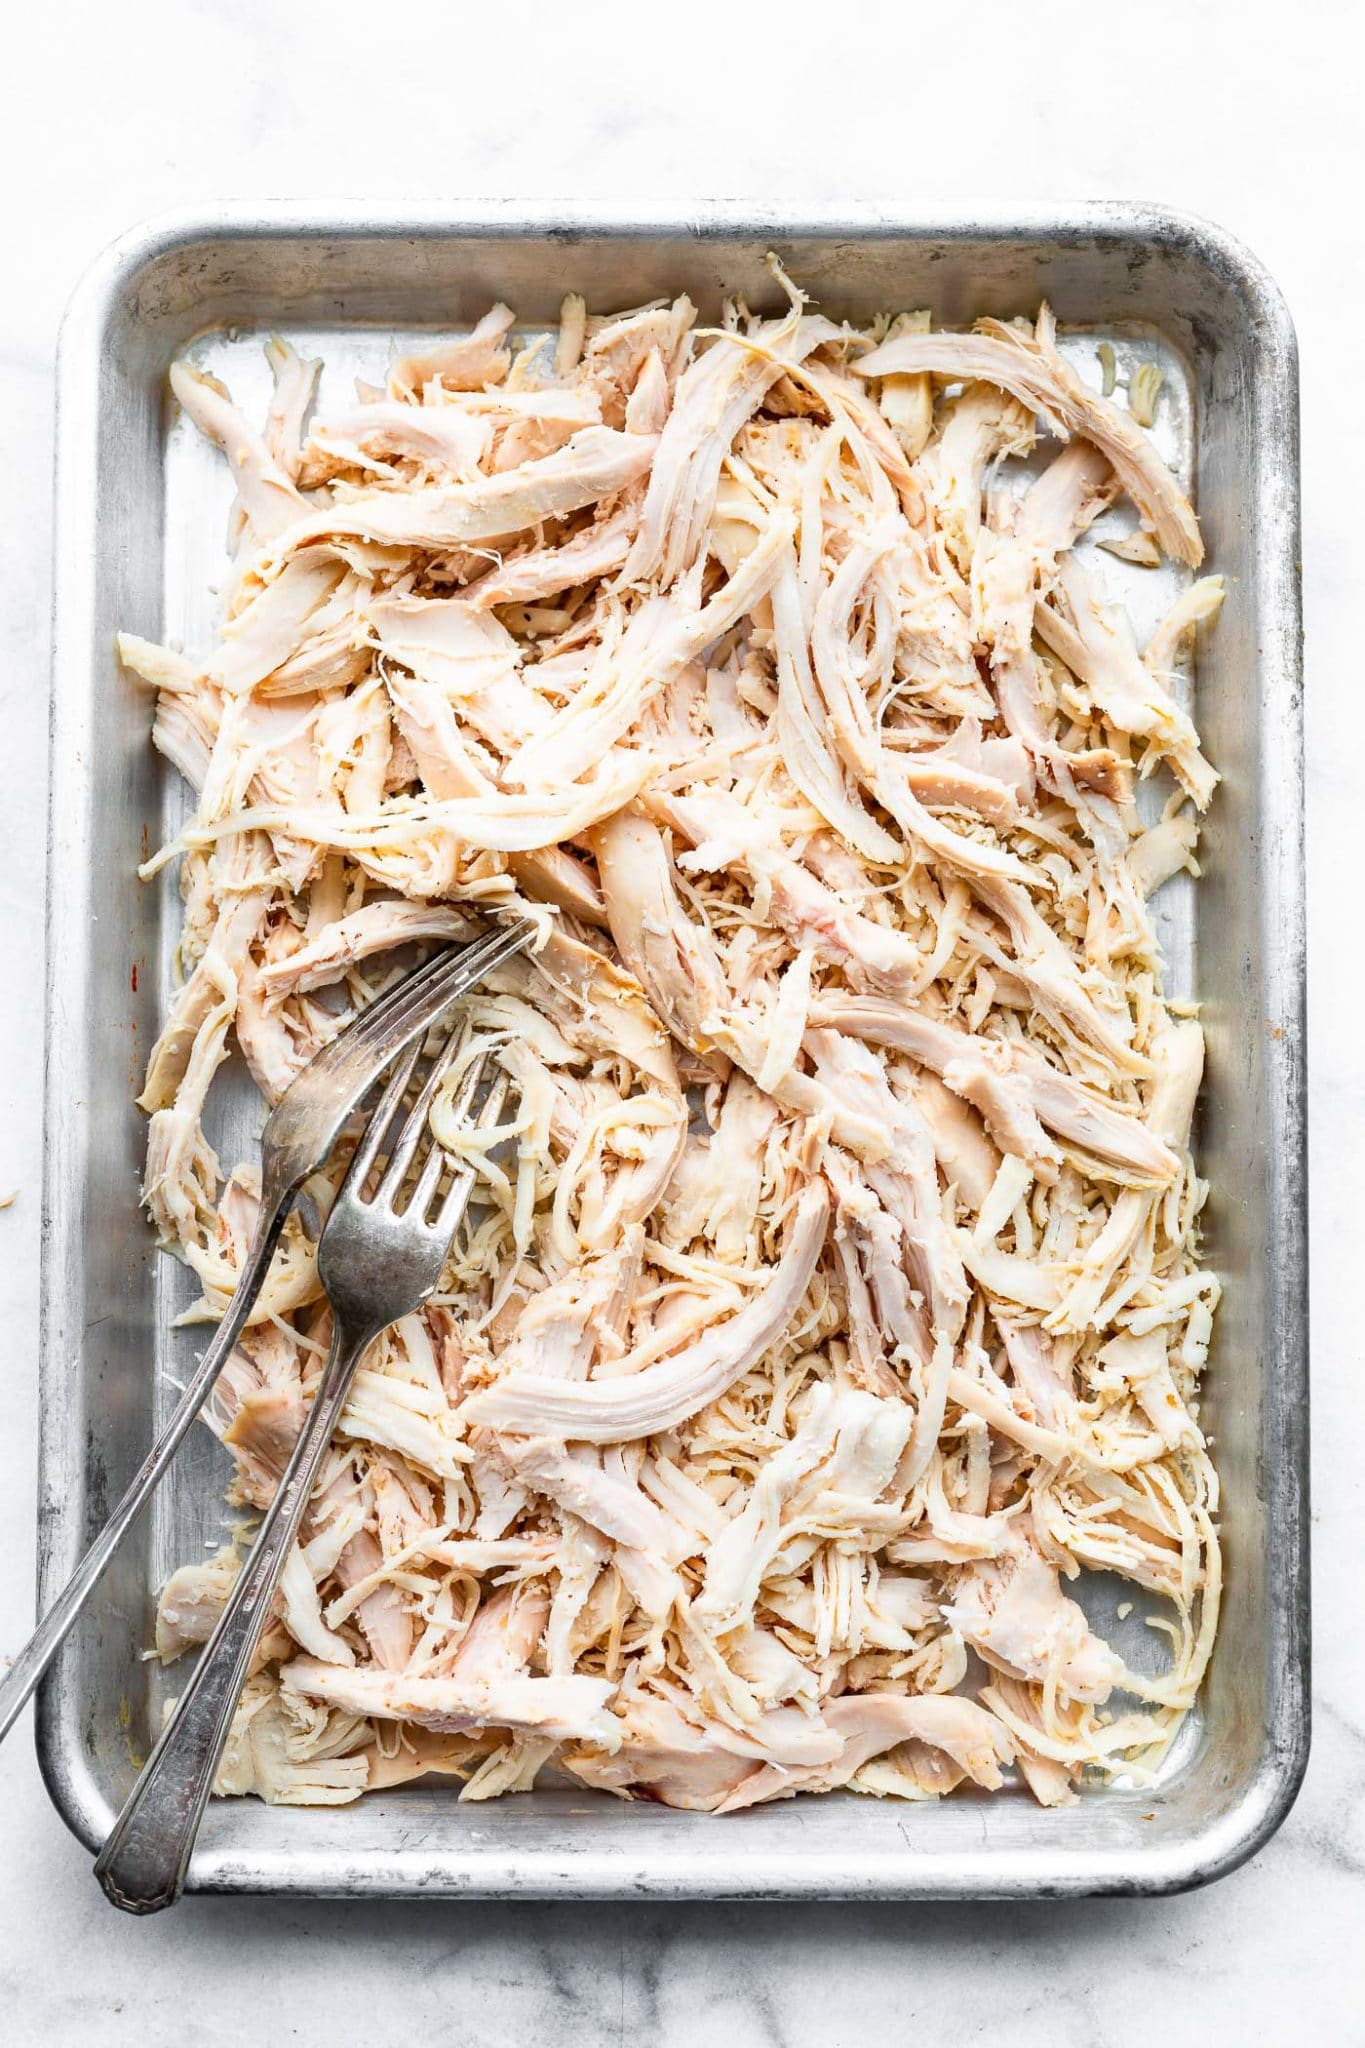 Overhead image of shredded chicken breast on a sheet pan.